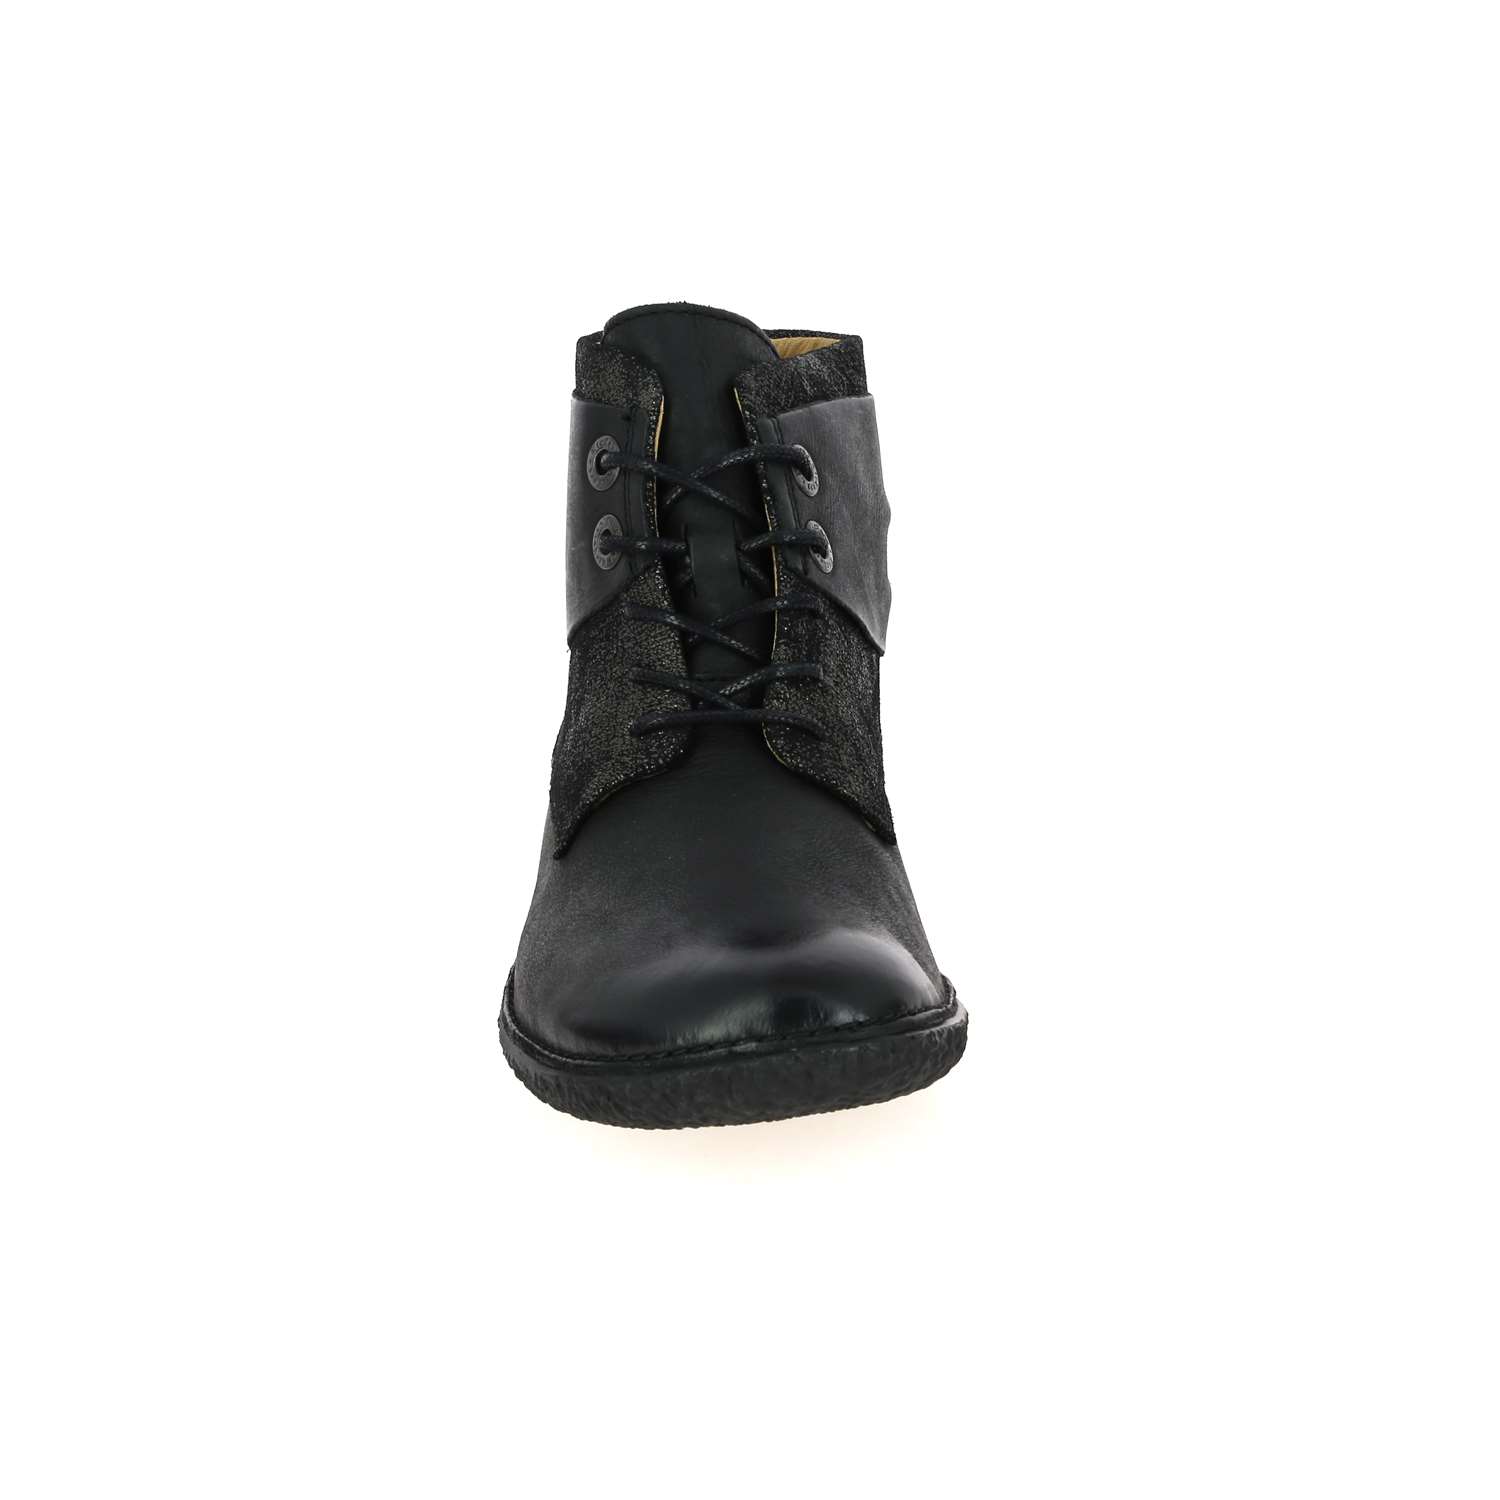 03 - HOBYLOW - KICKERS - Boots et bottines - Cuir